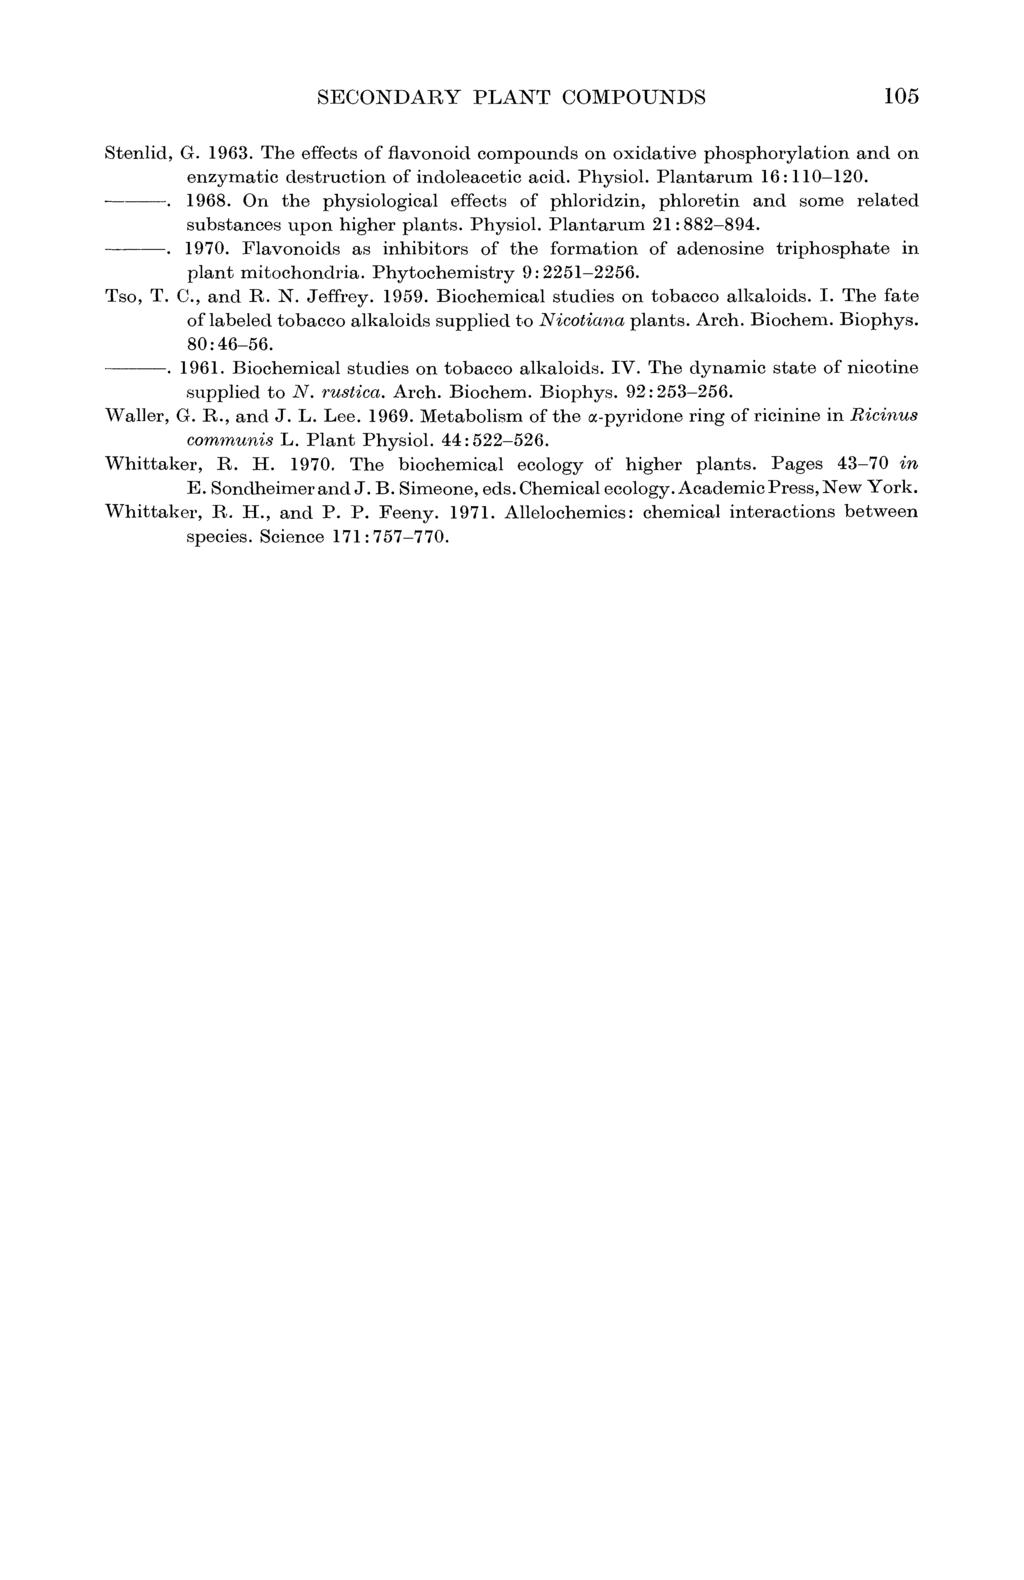 SECONDARY PLANT COMPOUNDS 105 Stenlid, G. 1963. The effects of flavonoids compounds on oxidative phosphorylation and on enzymatic destruction of indoleacetic acid. Physiol. Plantarum 16:110-120. 1968.